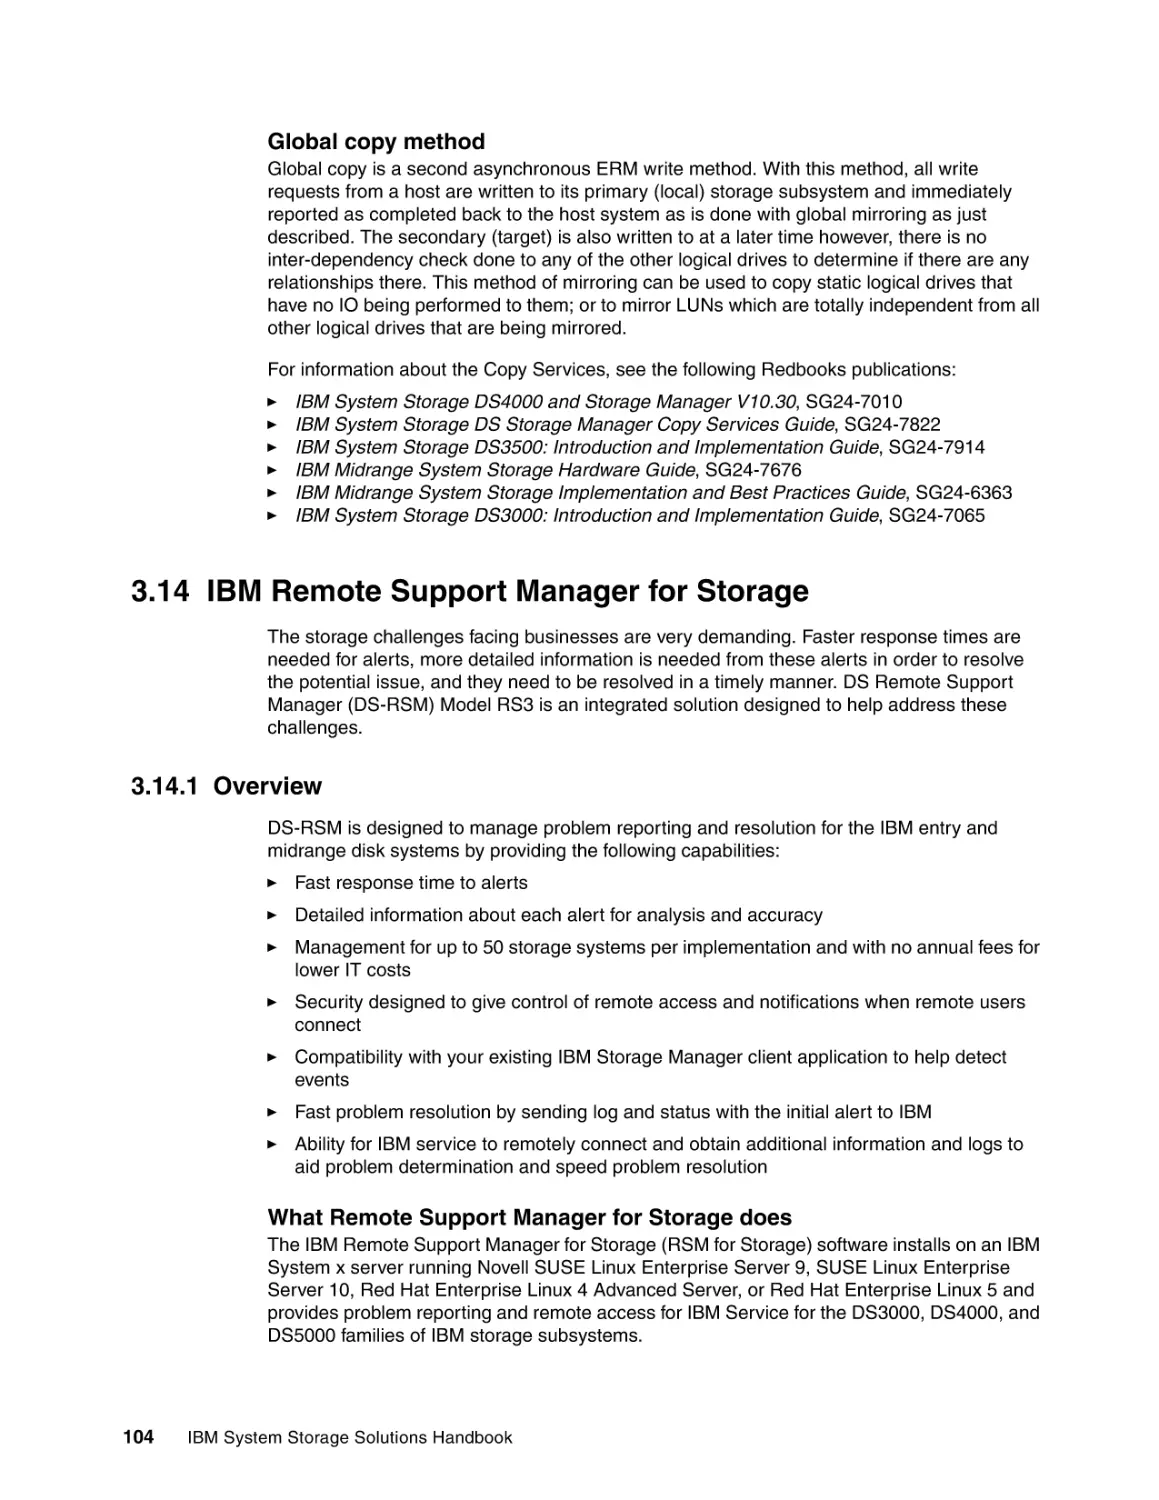 3.14 IBM Remote Support Manager for Storage
3.14.1 Overview